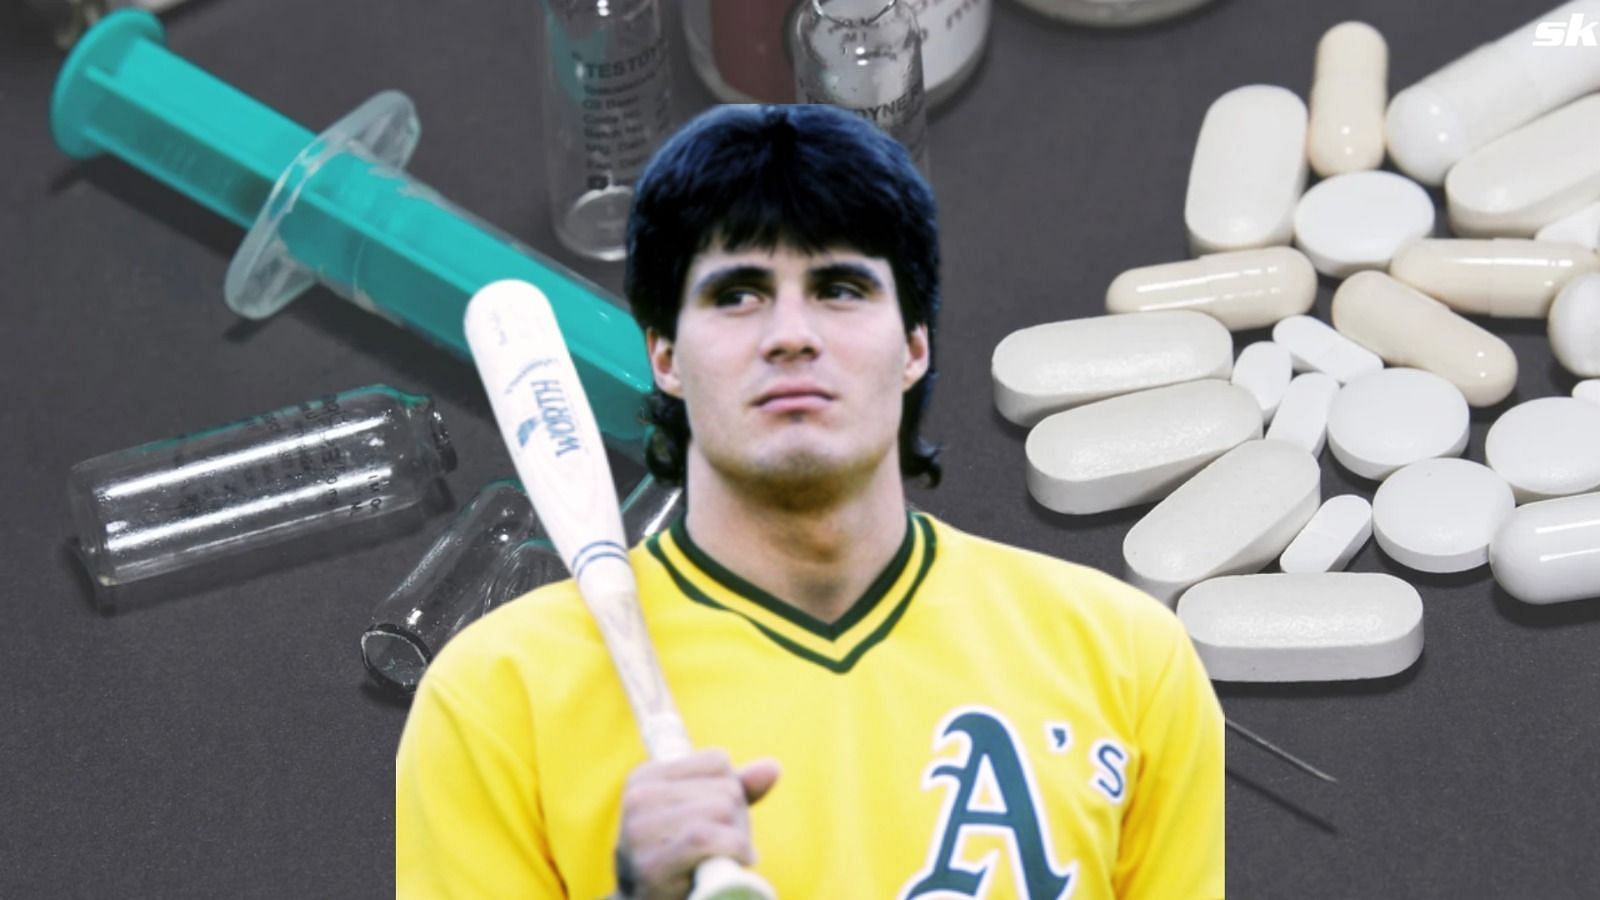 Jose Canseco once exposed web of silence around illicit steroid use exposing players